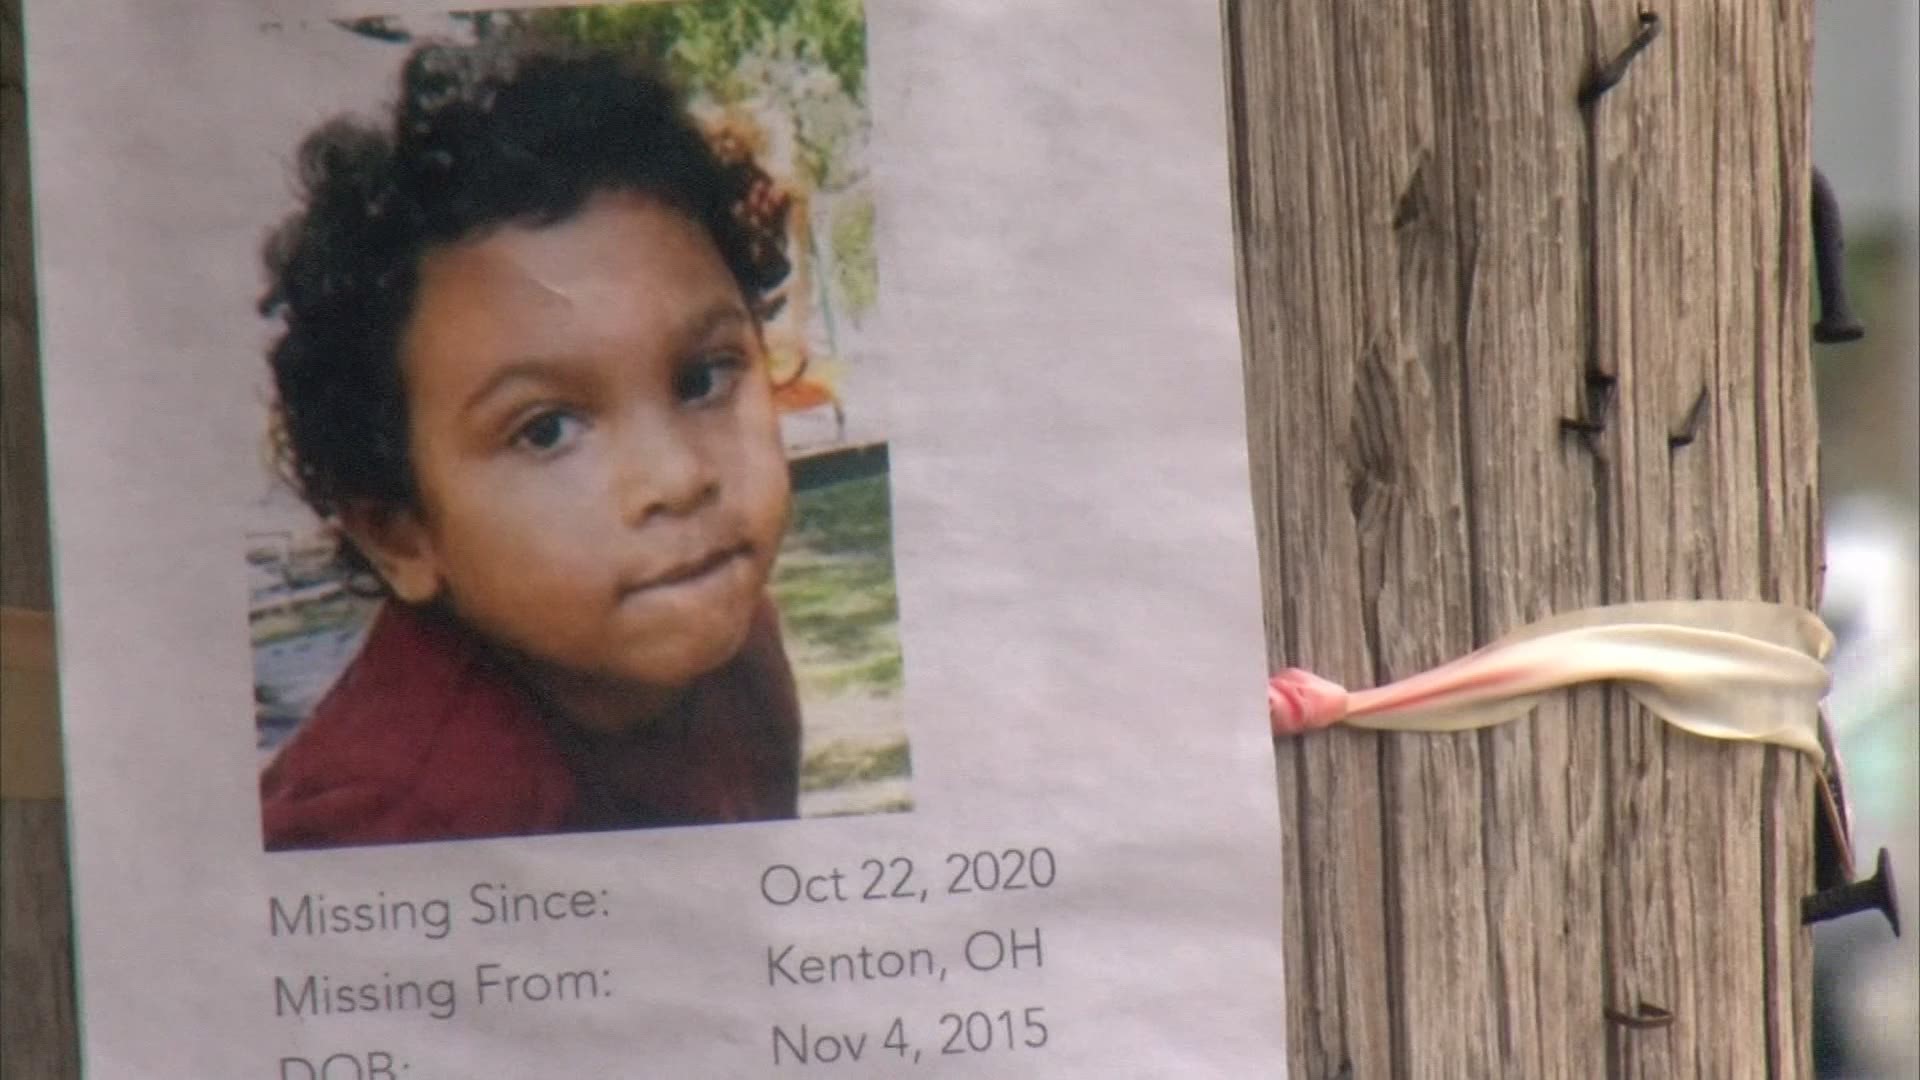 According to The City of Kenton, 4-year-old Quentin Ellcessor was found dead Monday night in the Scioto River, two miles east of where he was last seen.